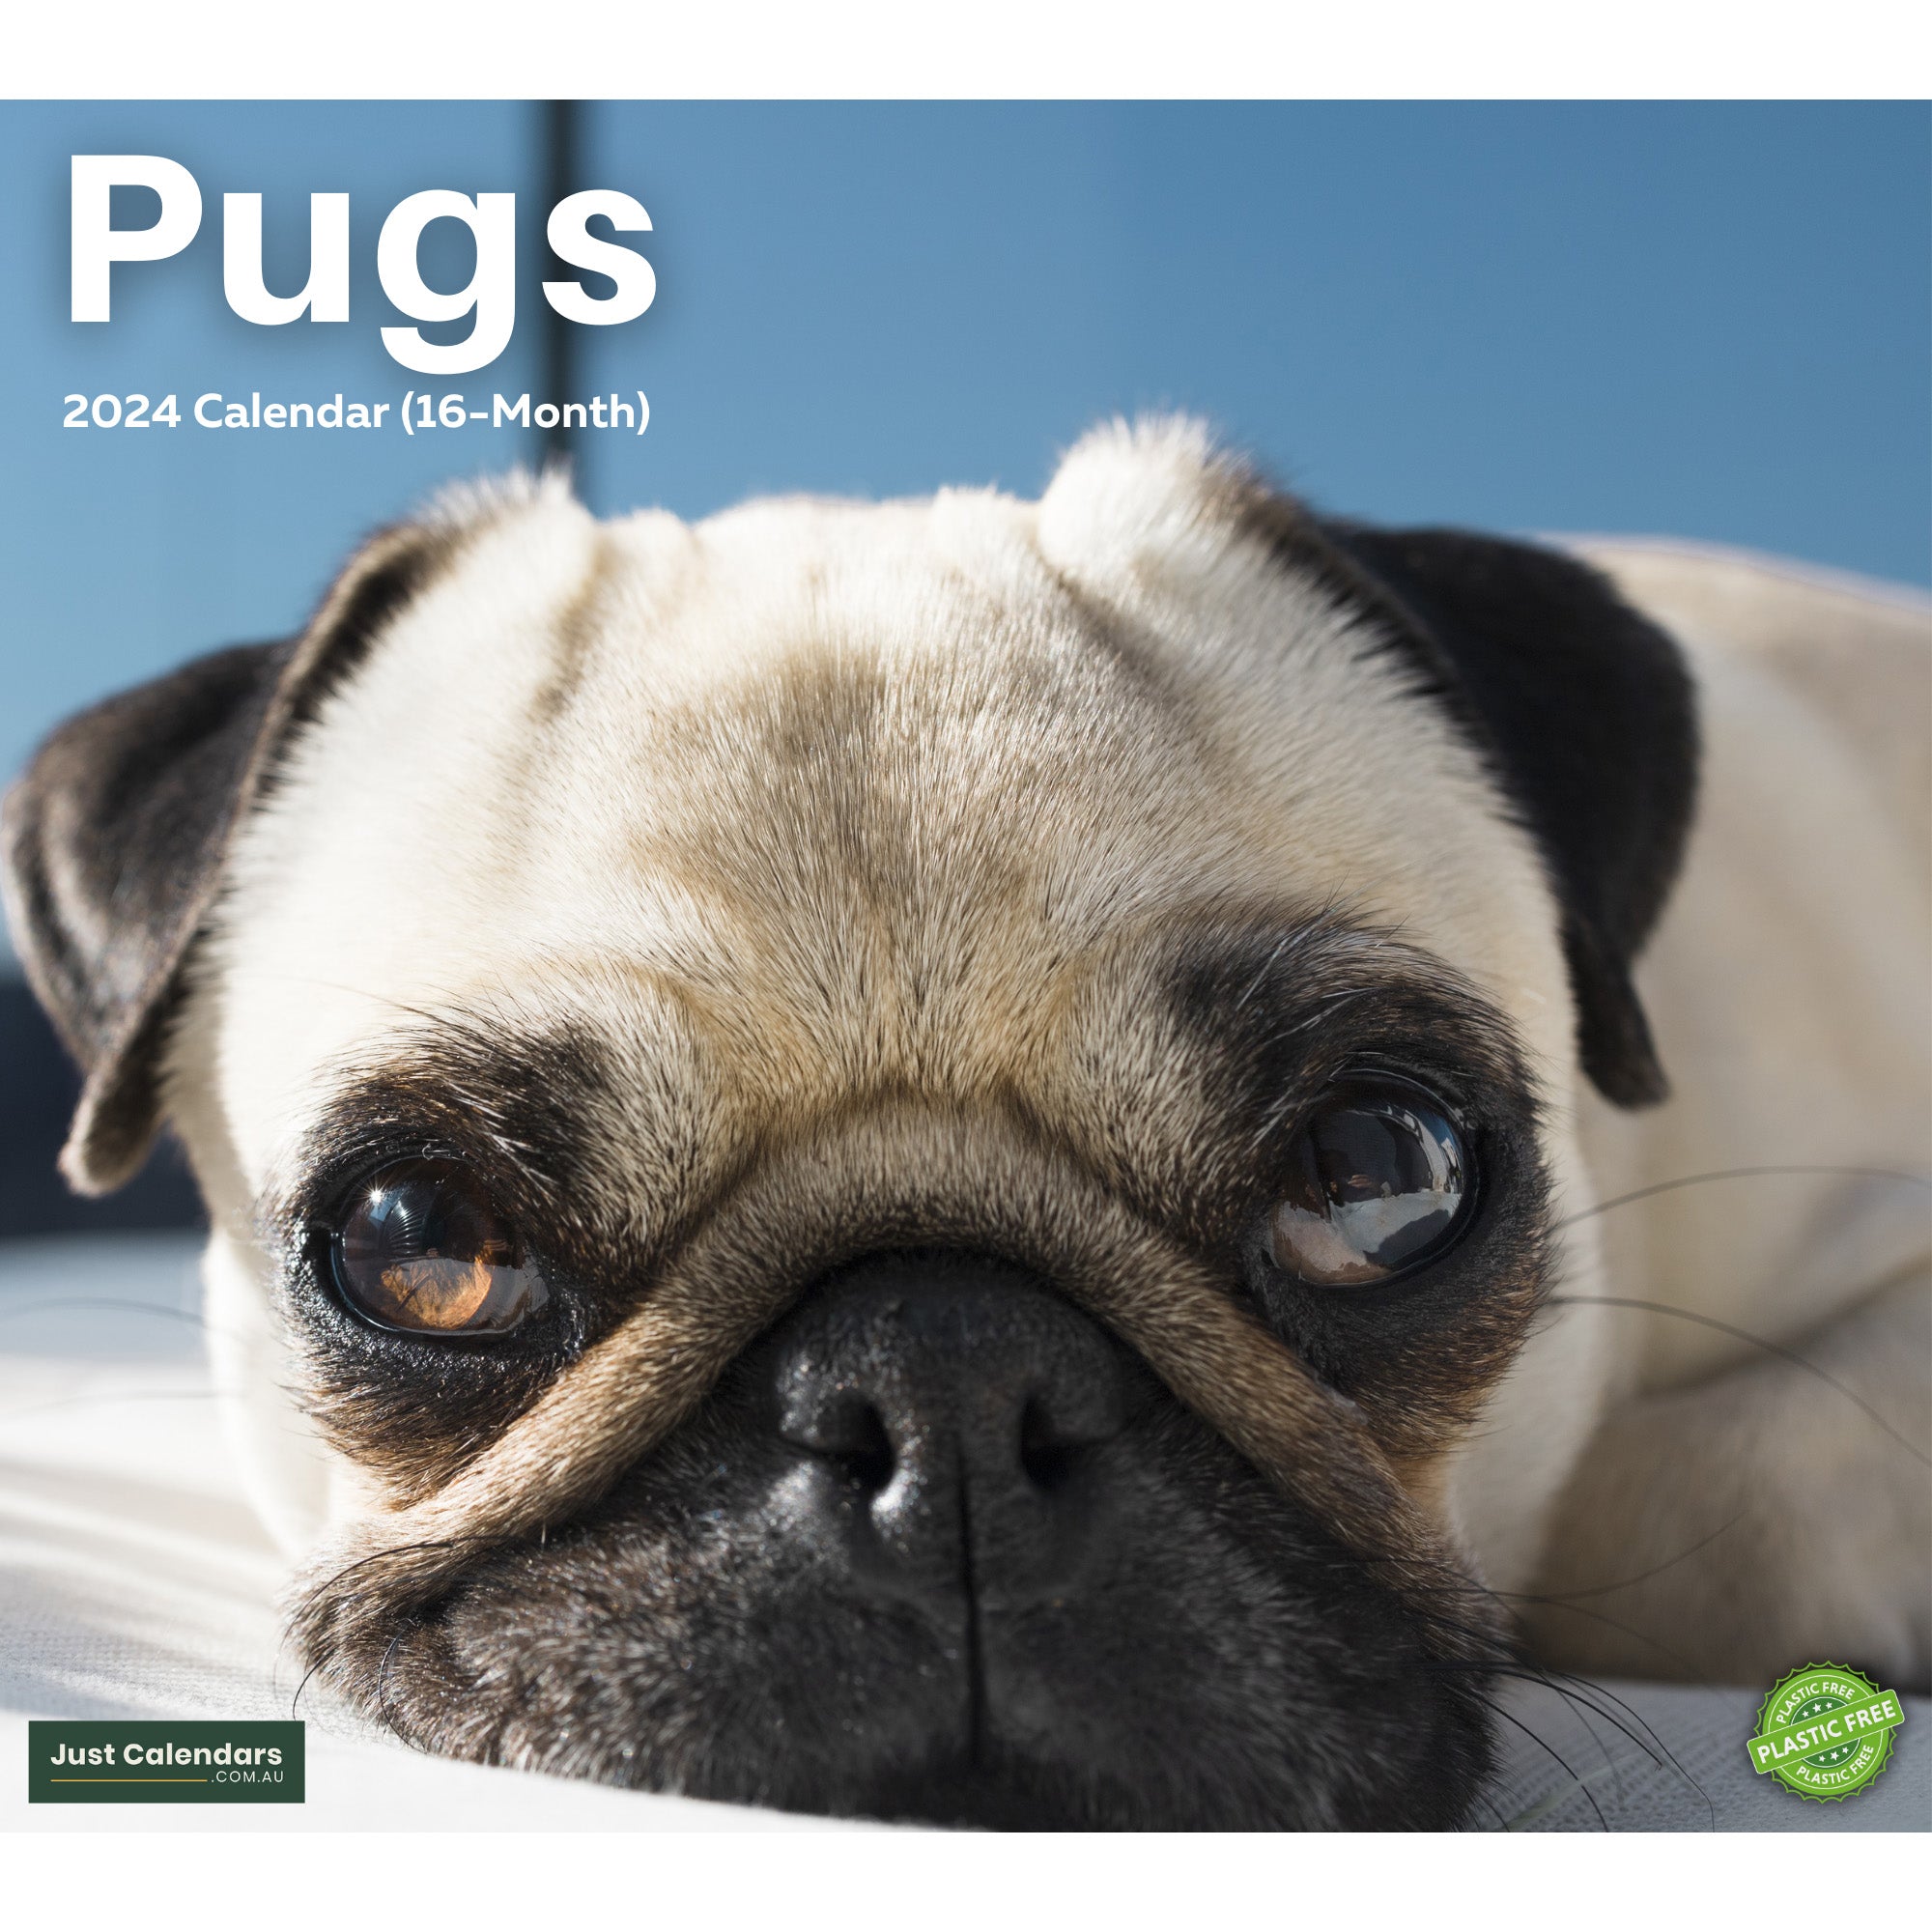 2024 Pugs Dogs & Puppies - Deluxe Wall Calendar by Just Calendars - 16 Month - Plastic Free